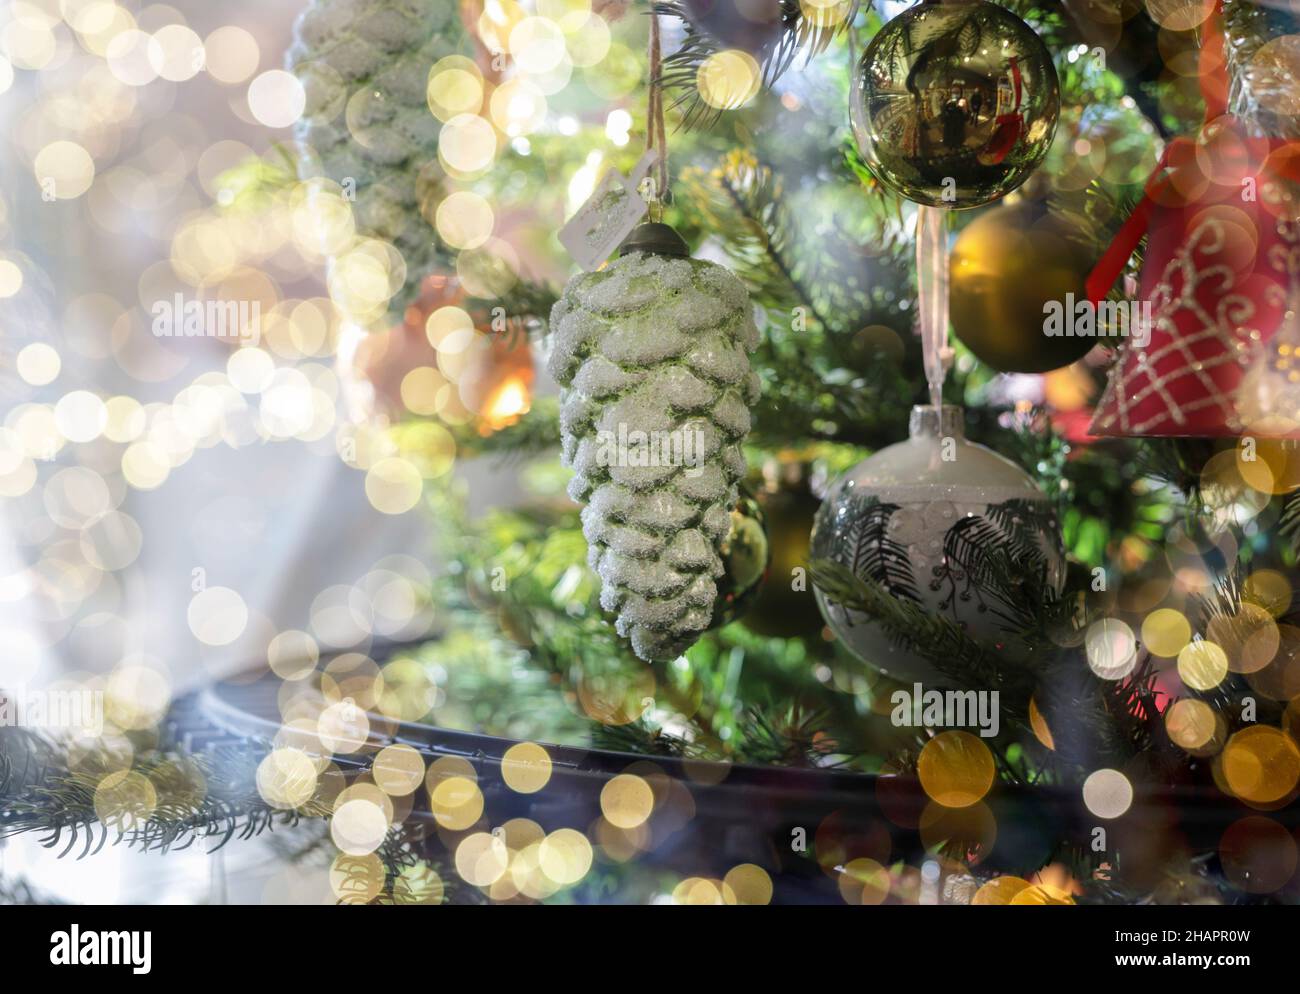 Long Garland of Christmas Tree Branches . Realistic Fir-tree Bo Stock Photo  - Image of merry, natural: 104843290